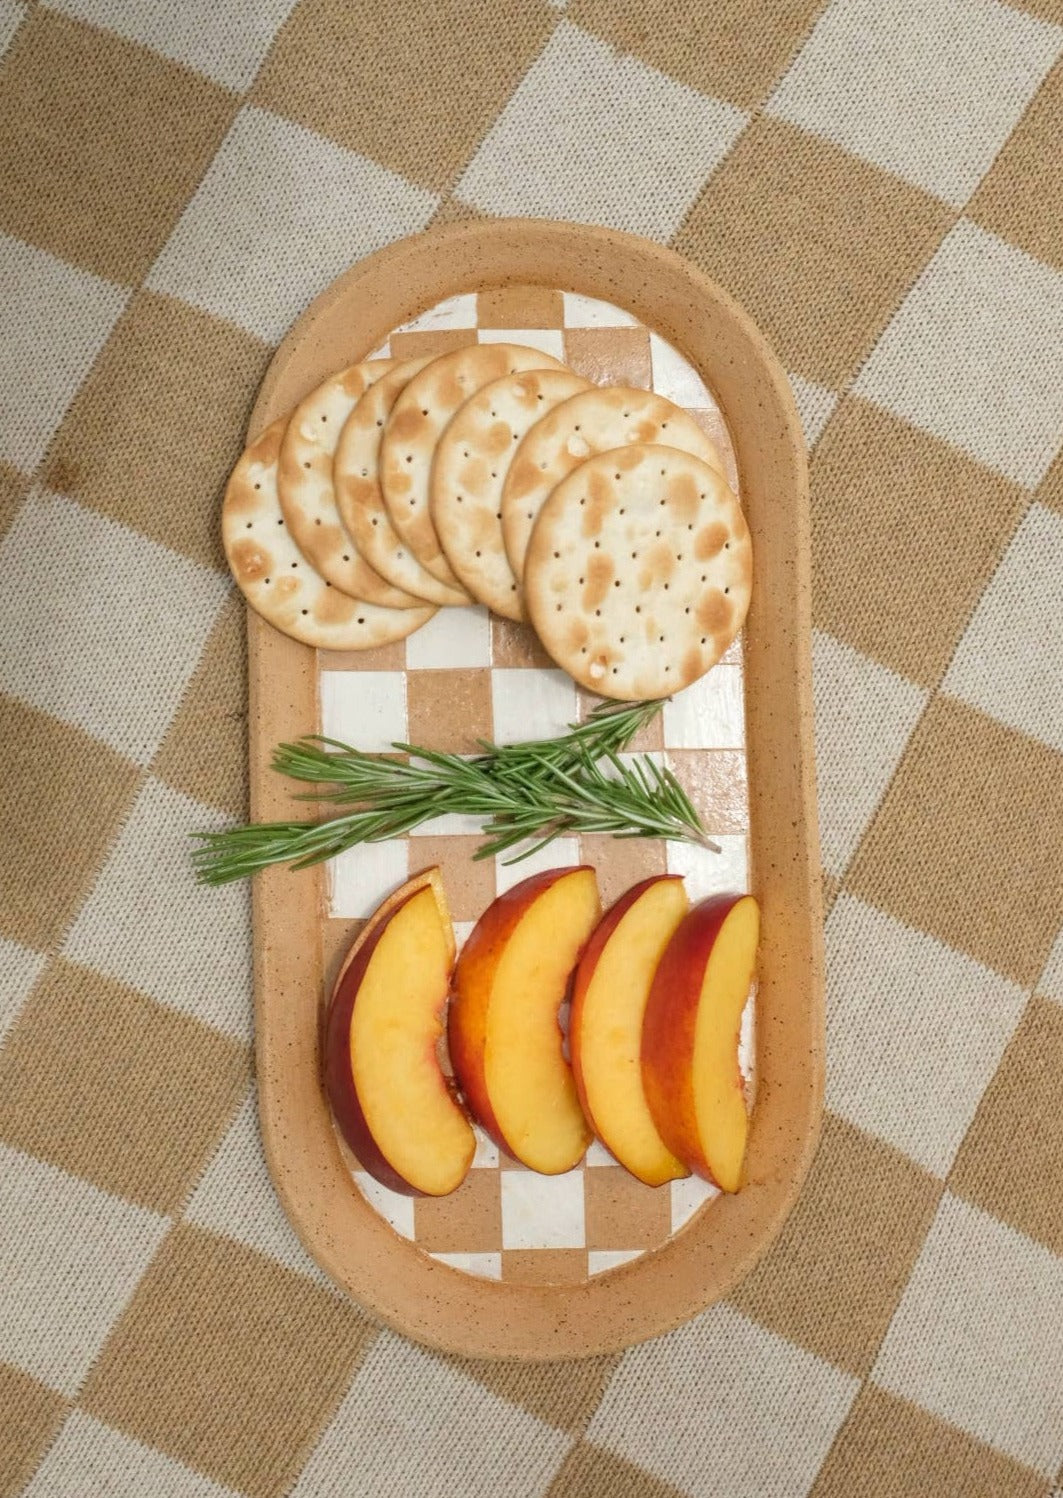 Checkered Tray with Snacks Covering